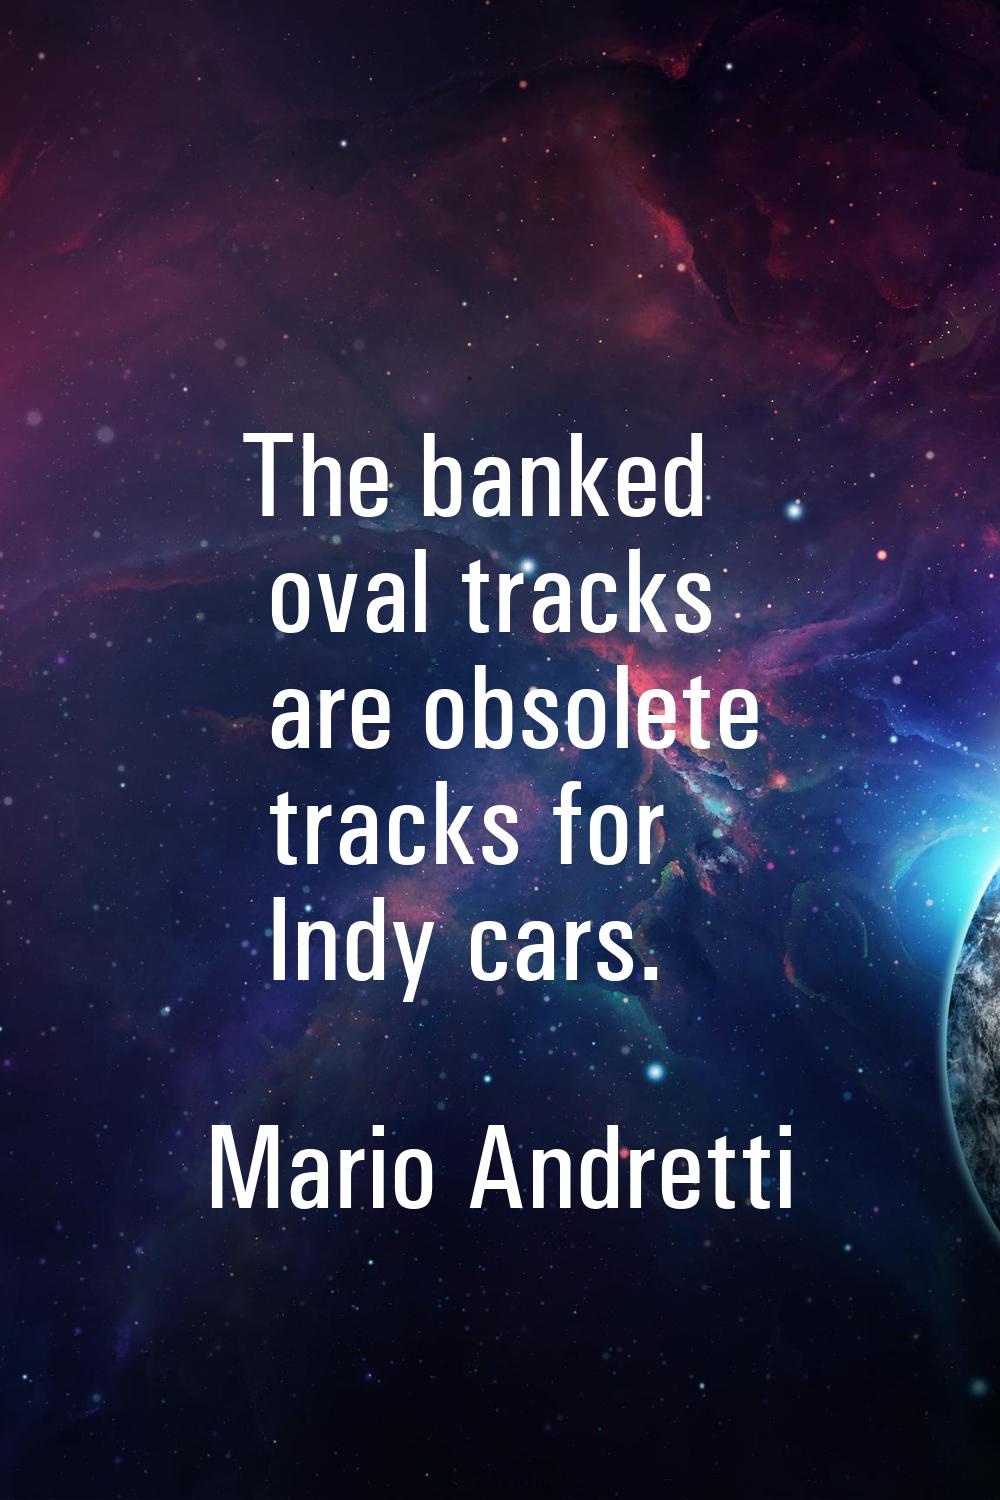 The banked oval tracks are obsolete tracks for Indy cars.